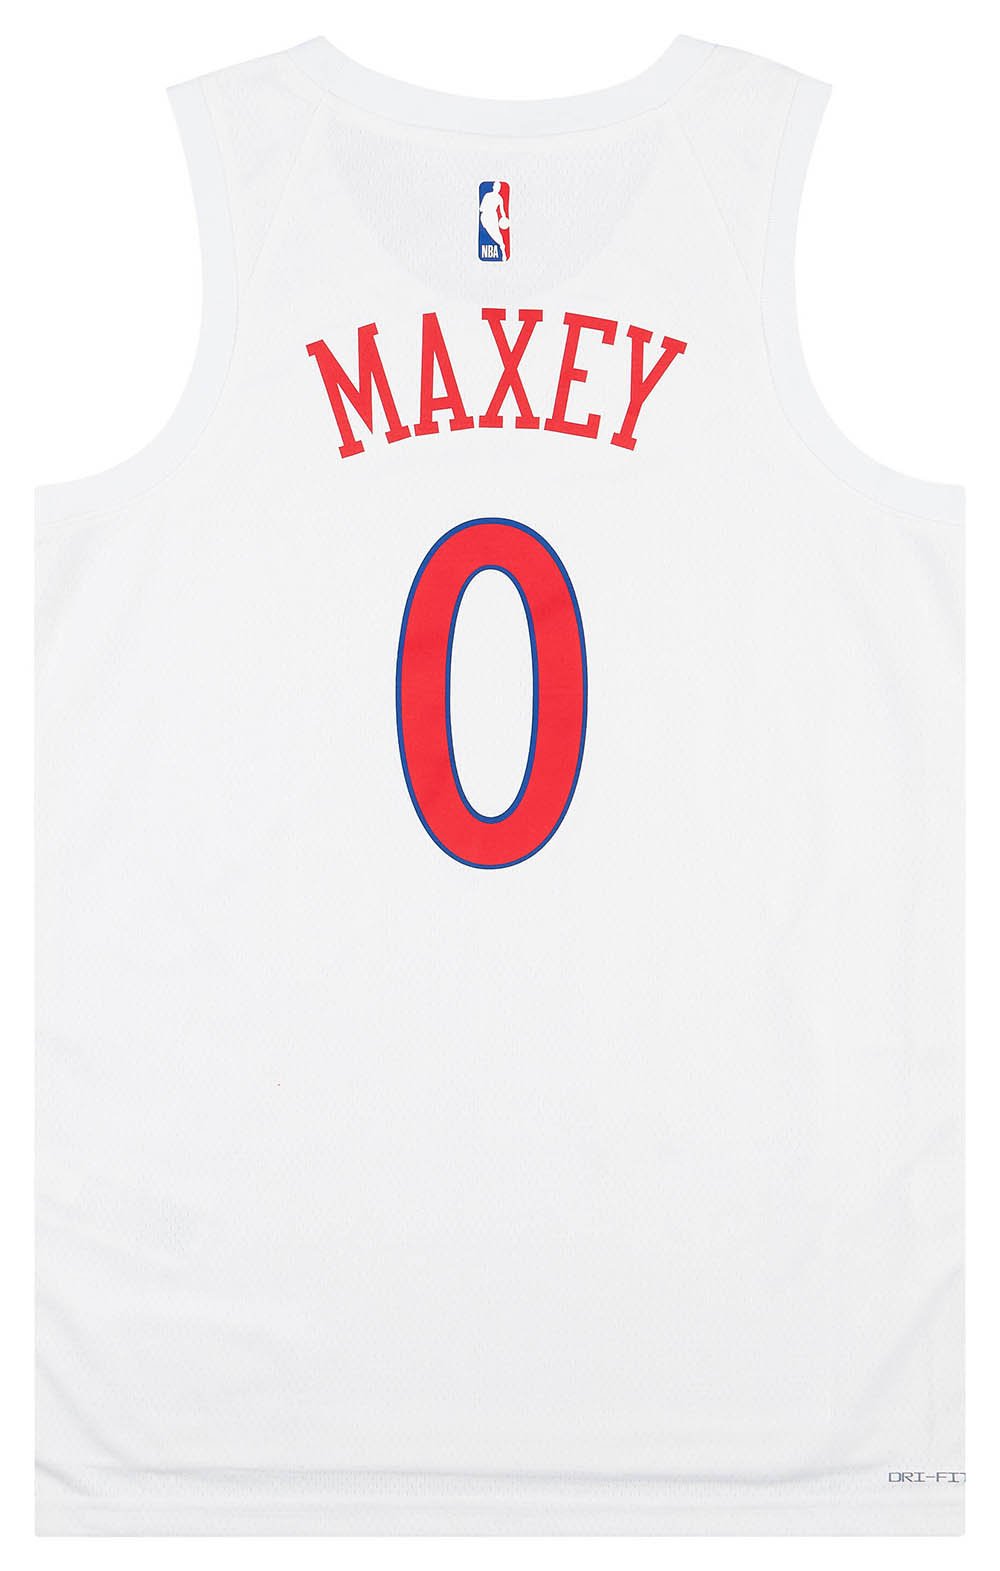 76ers maxey jersey